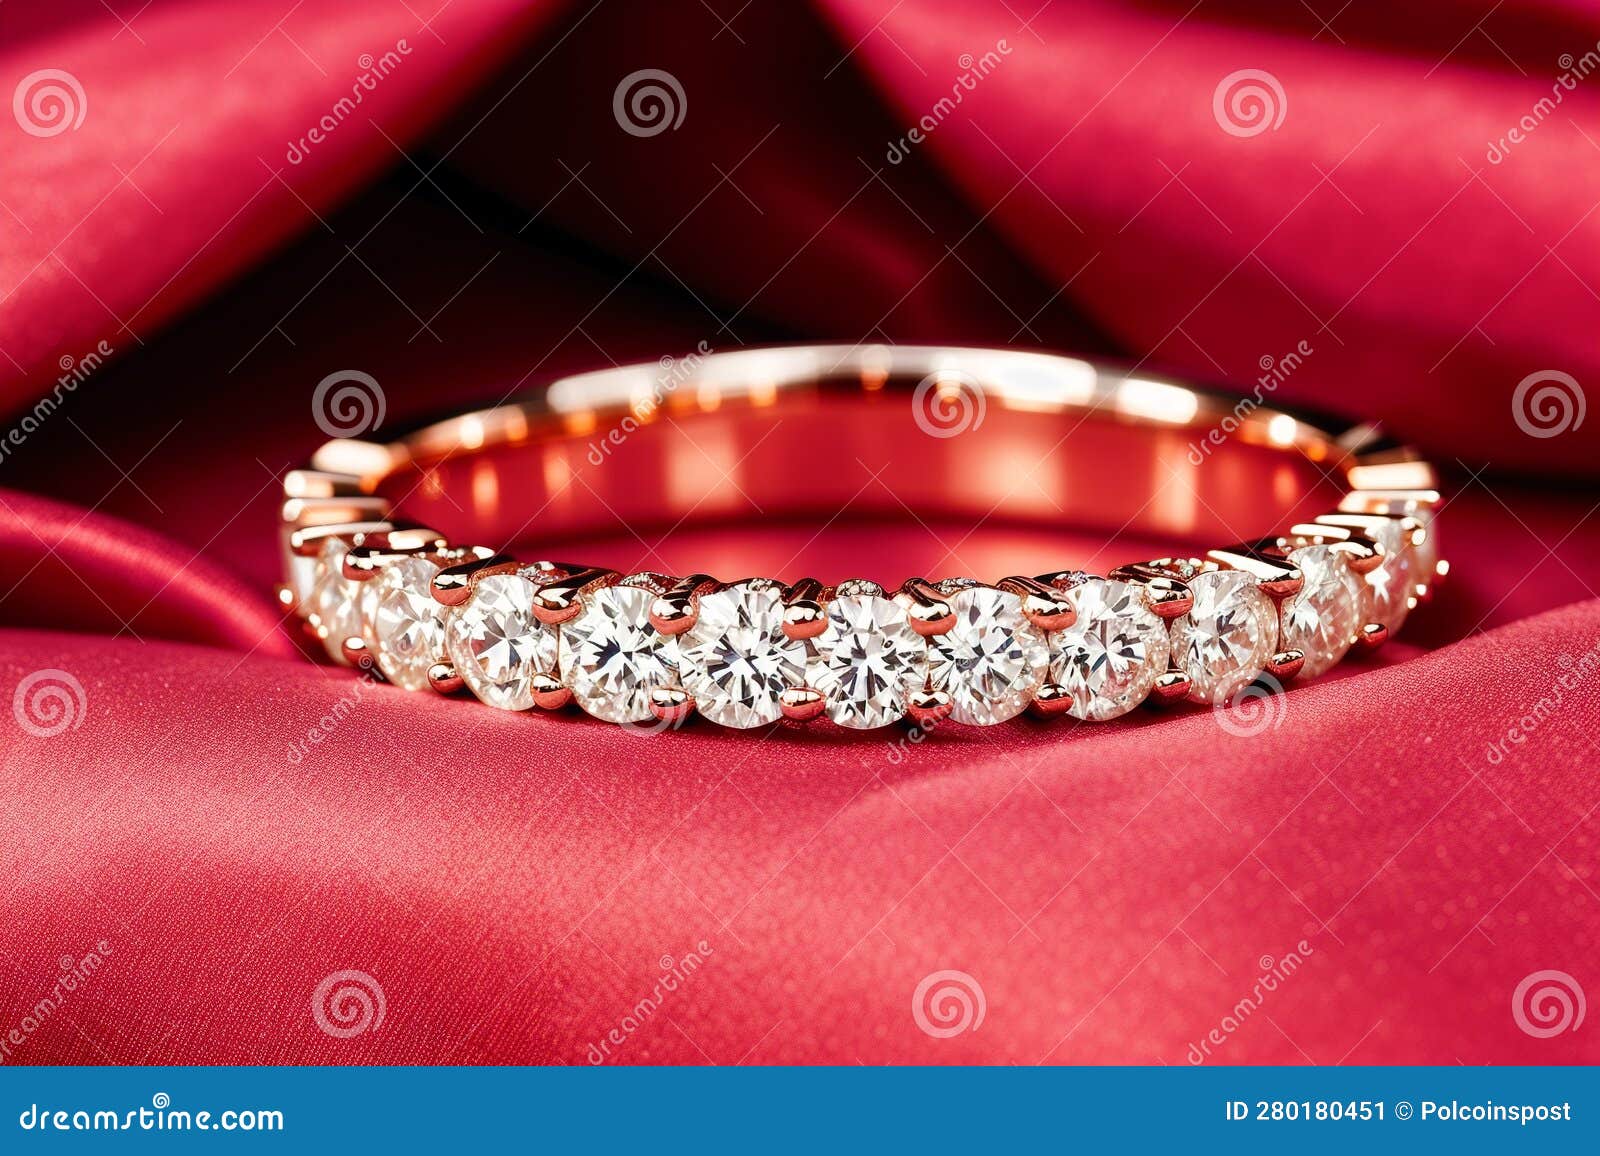 What better way to express your love than through diamonds?? Beautiful 